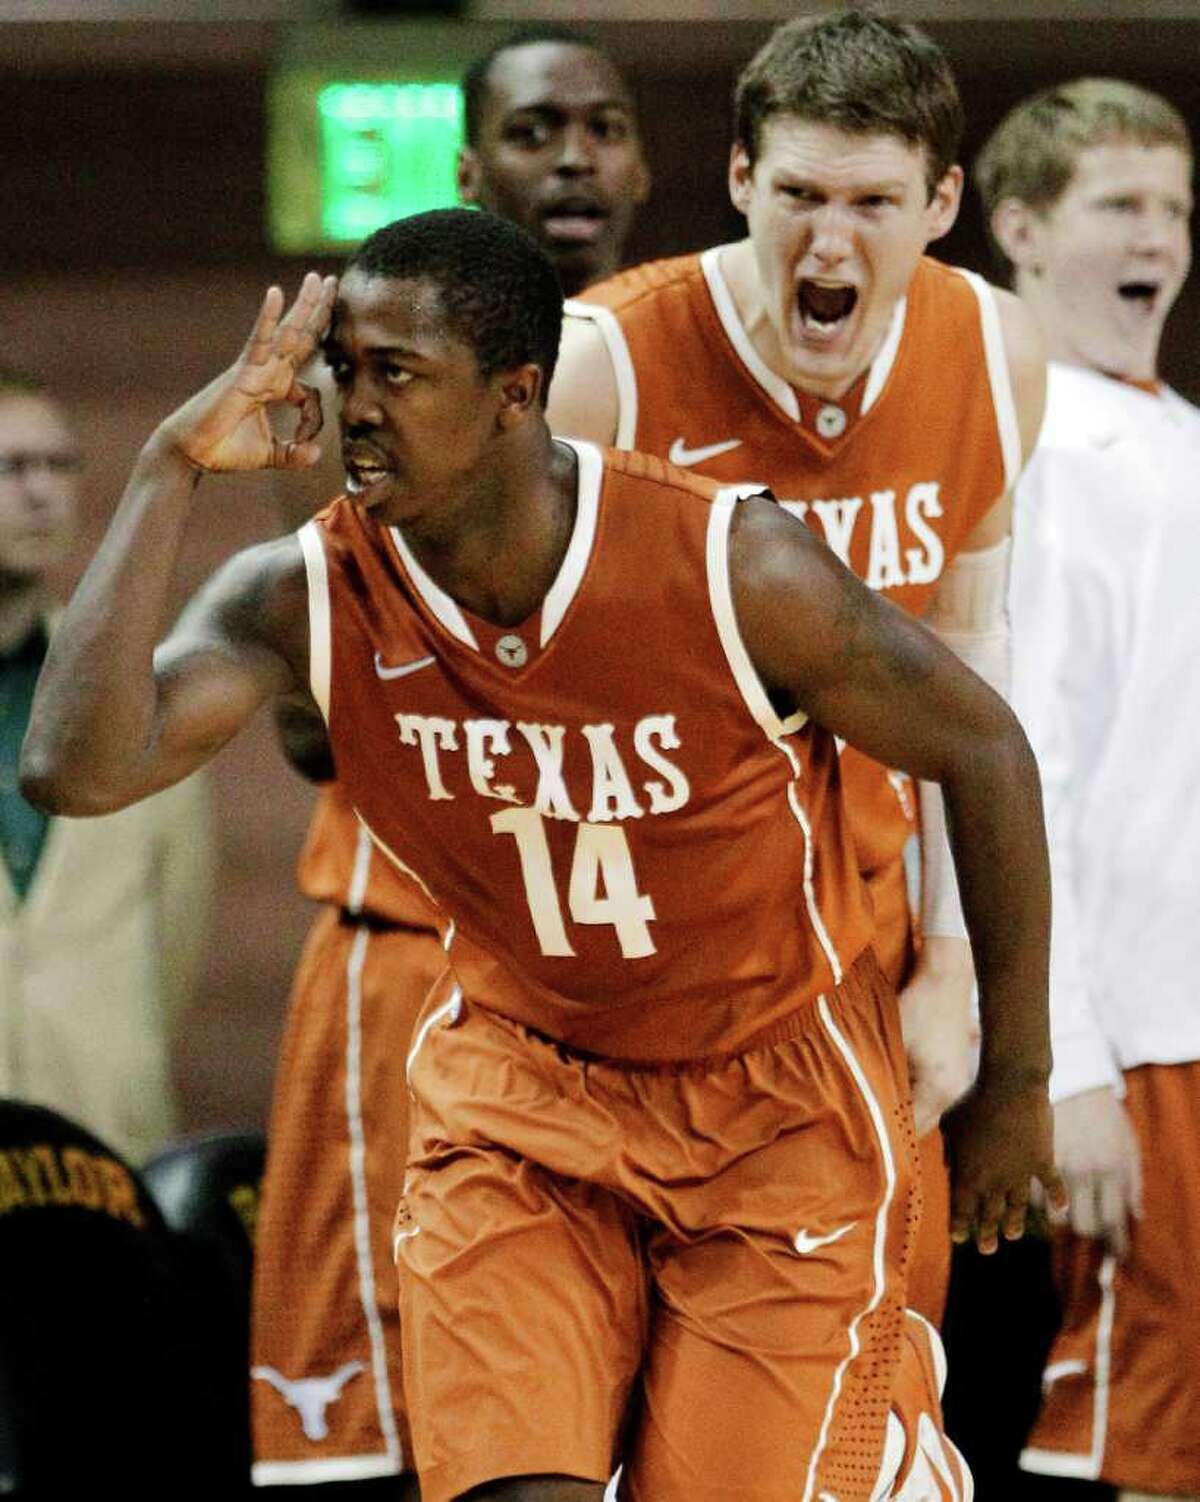 Longhorns guard J’Covan Brown started all 34 games and led Texas with 21.0 points per game this season.